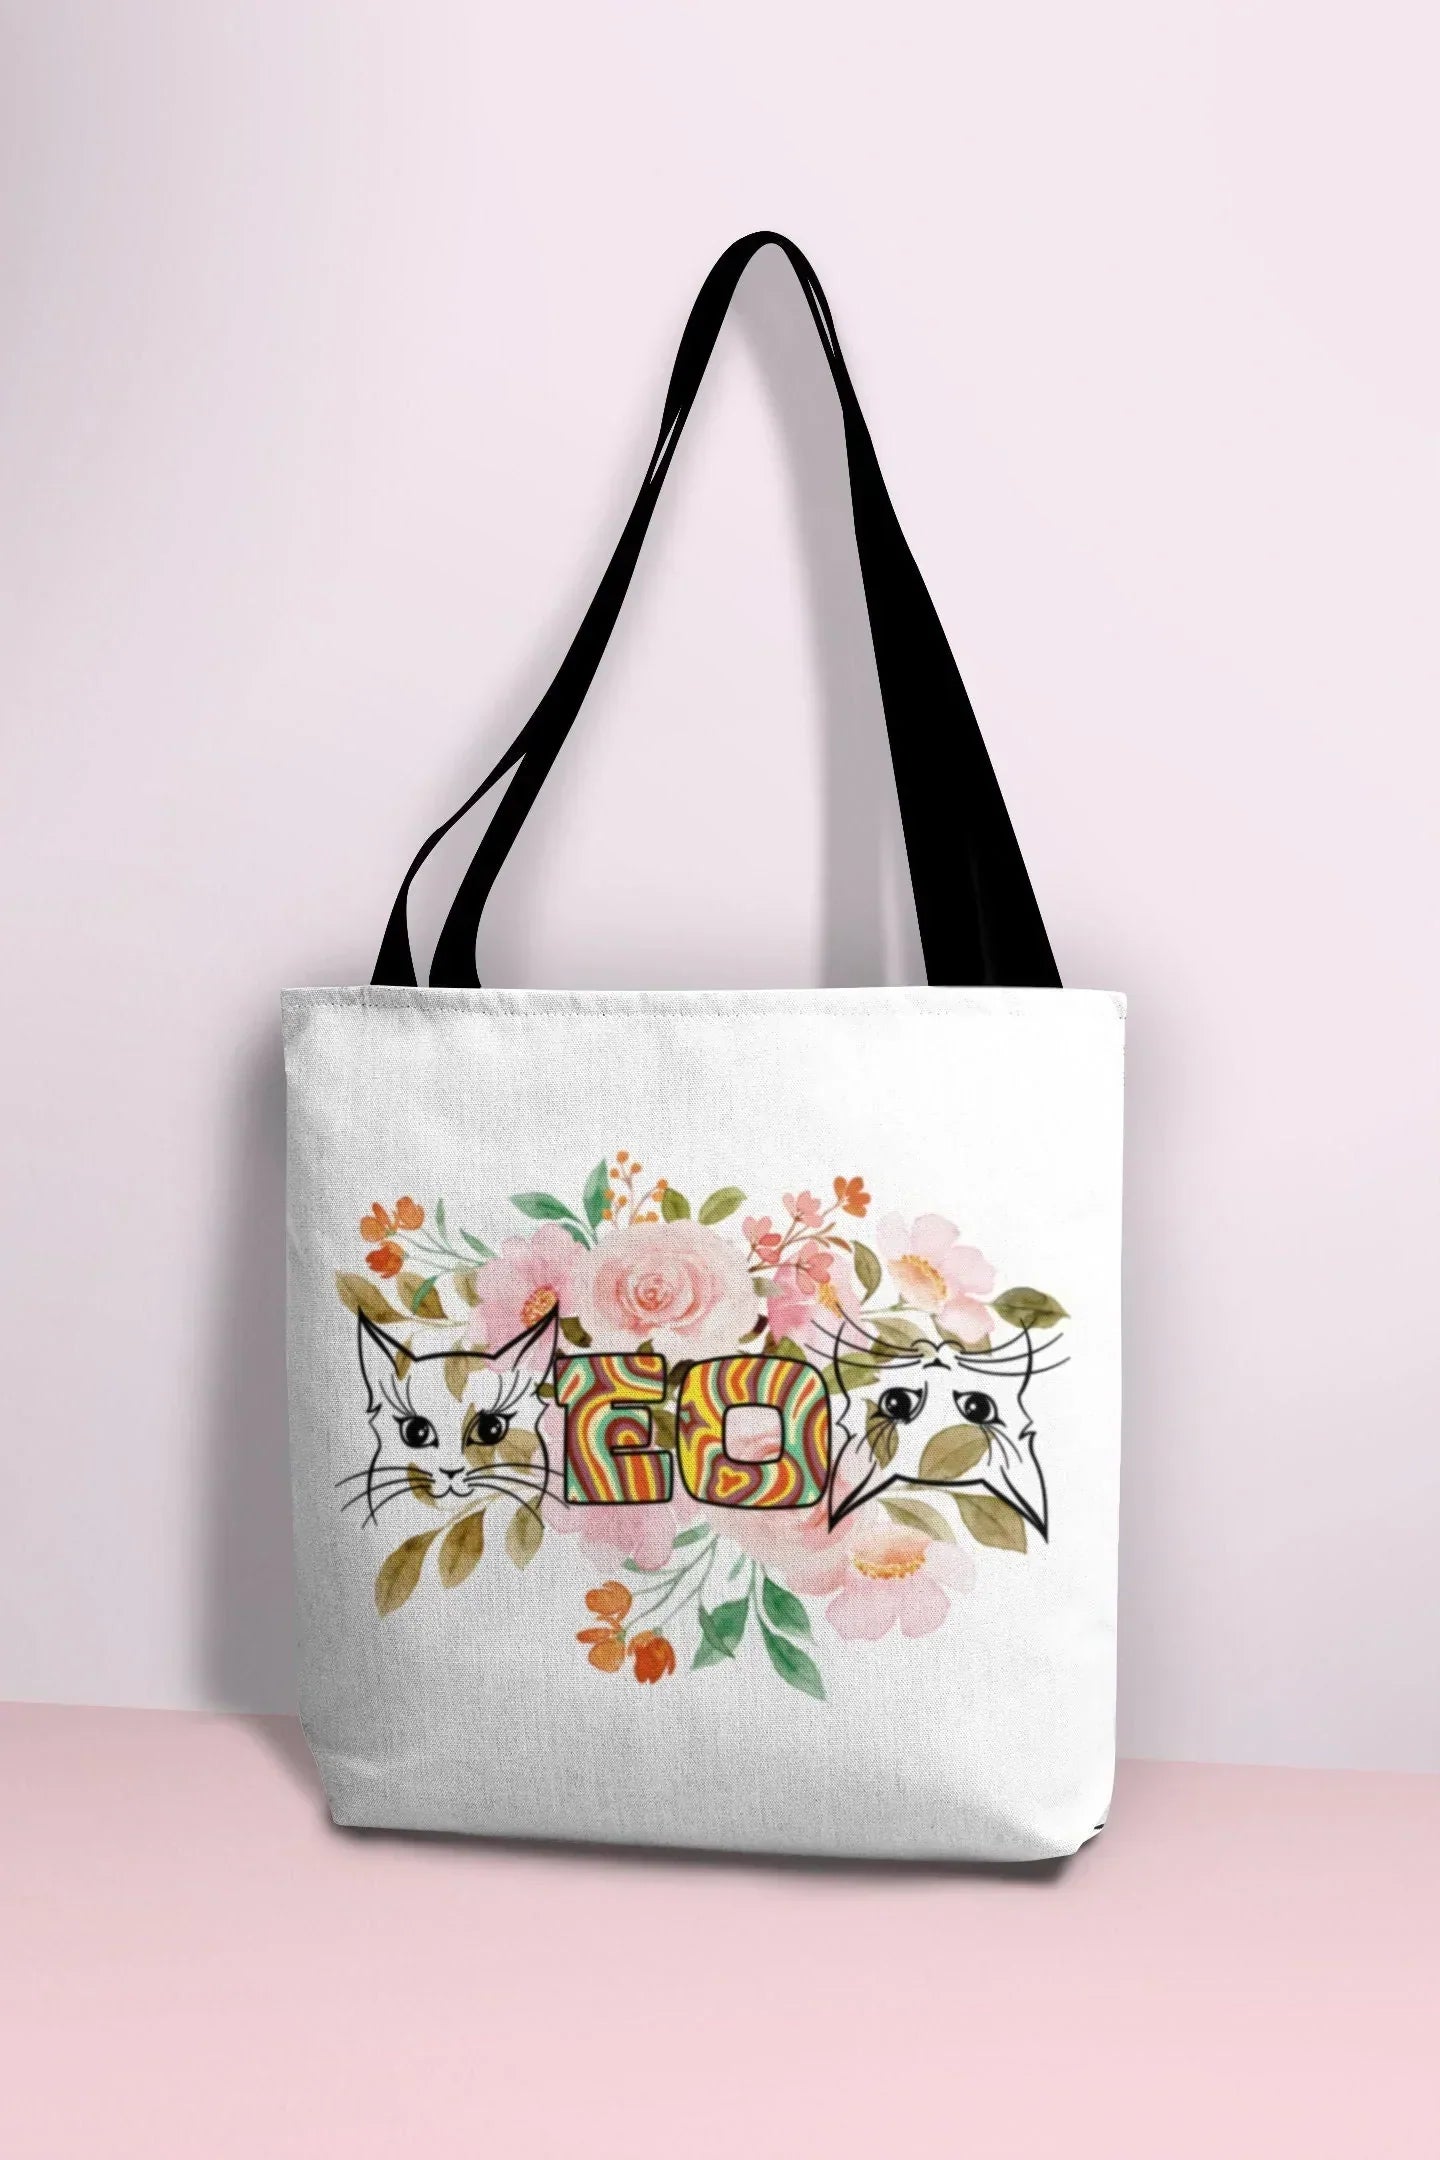 Cat Tote Bag, Aesthetic Tote Bag with Pockets, Hippie Cat Lovers Gift, Cat Mom Canvas Bag, Pro Choice Pro Feminism, Pussy Cat Themed Gifts HMDesignStudioUS